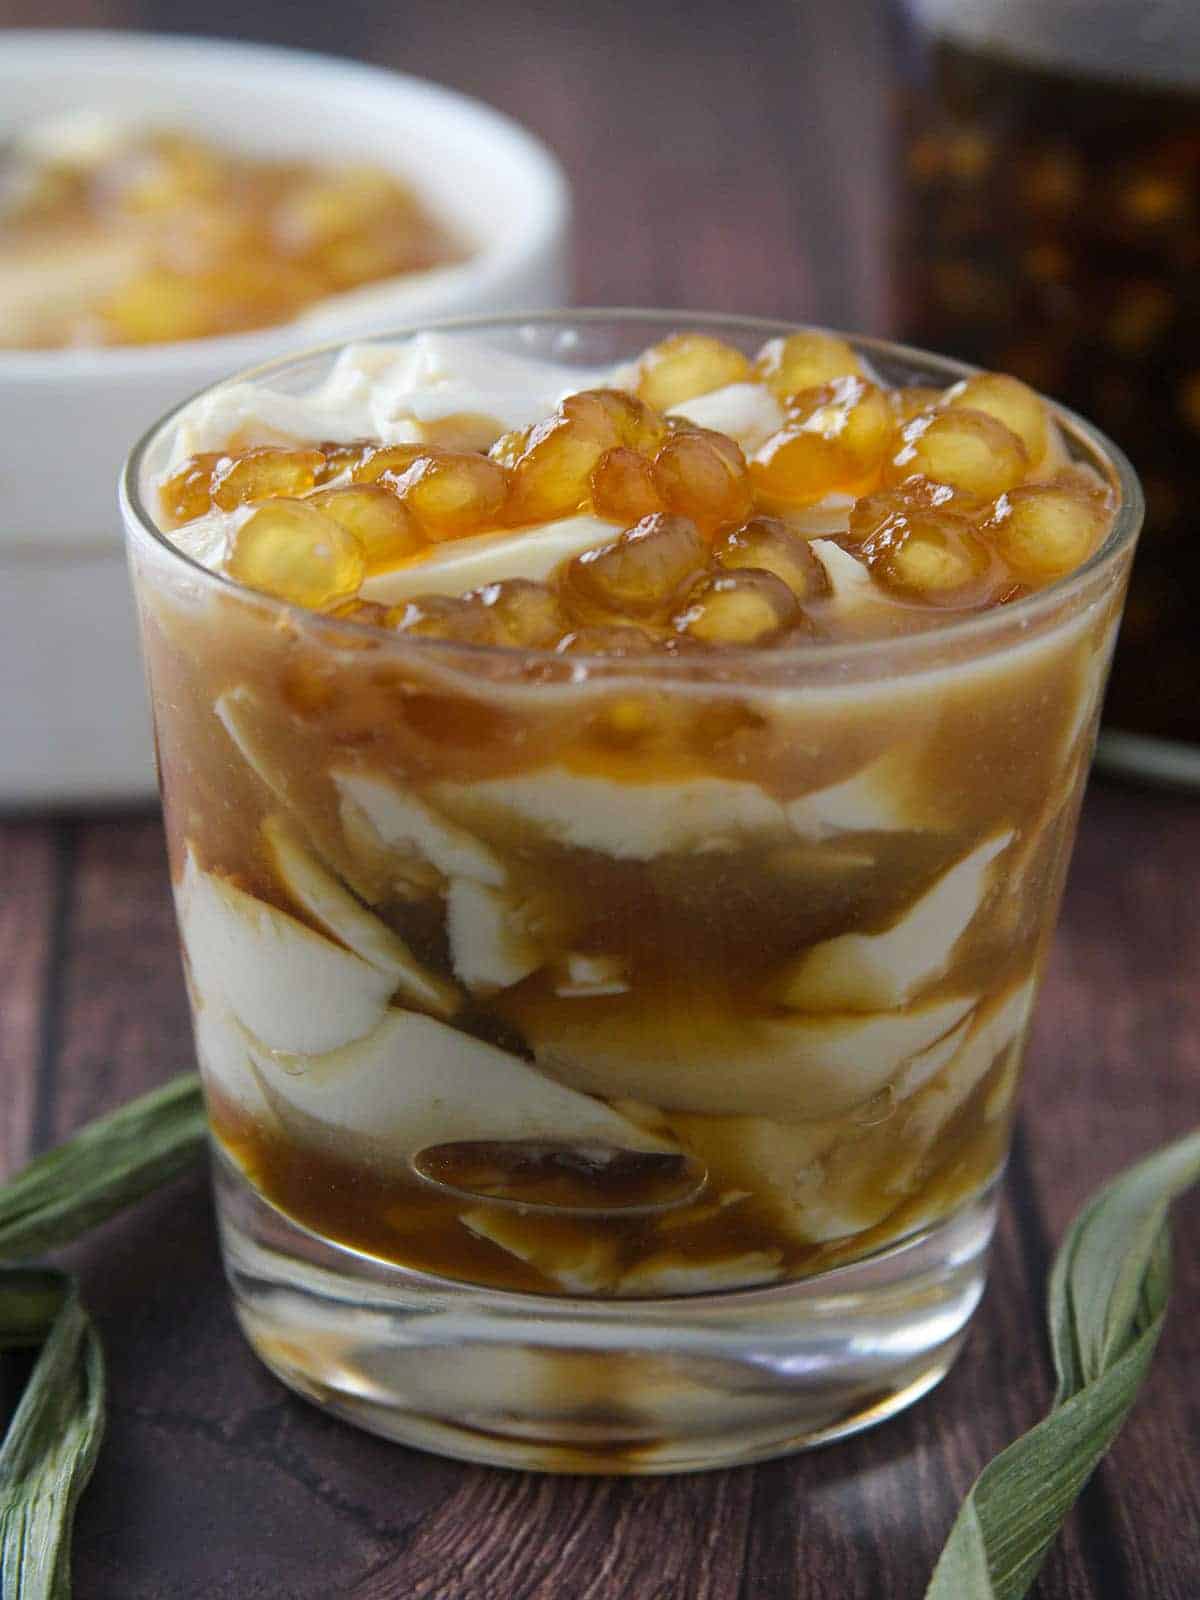 Taho in a clear glass with brown syrup and sago